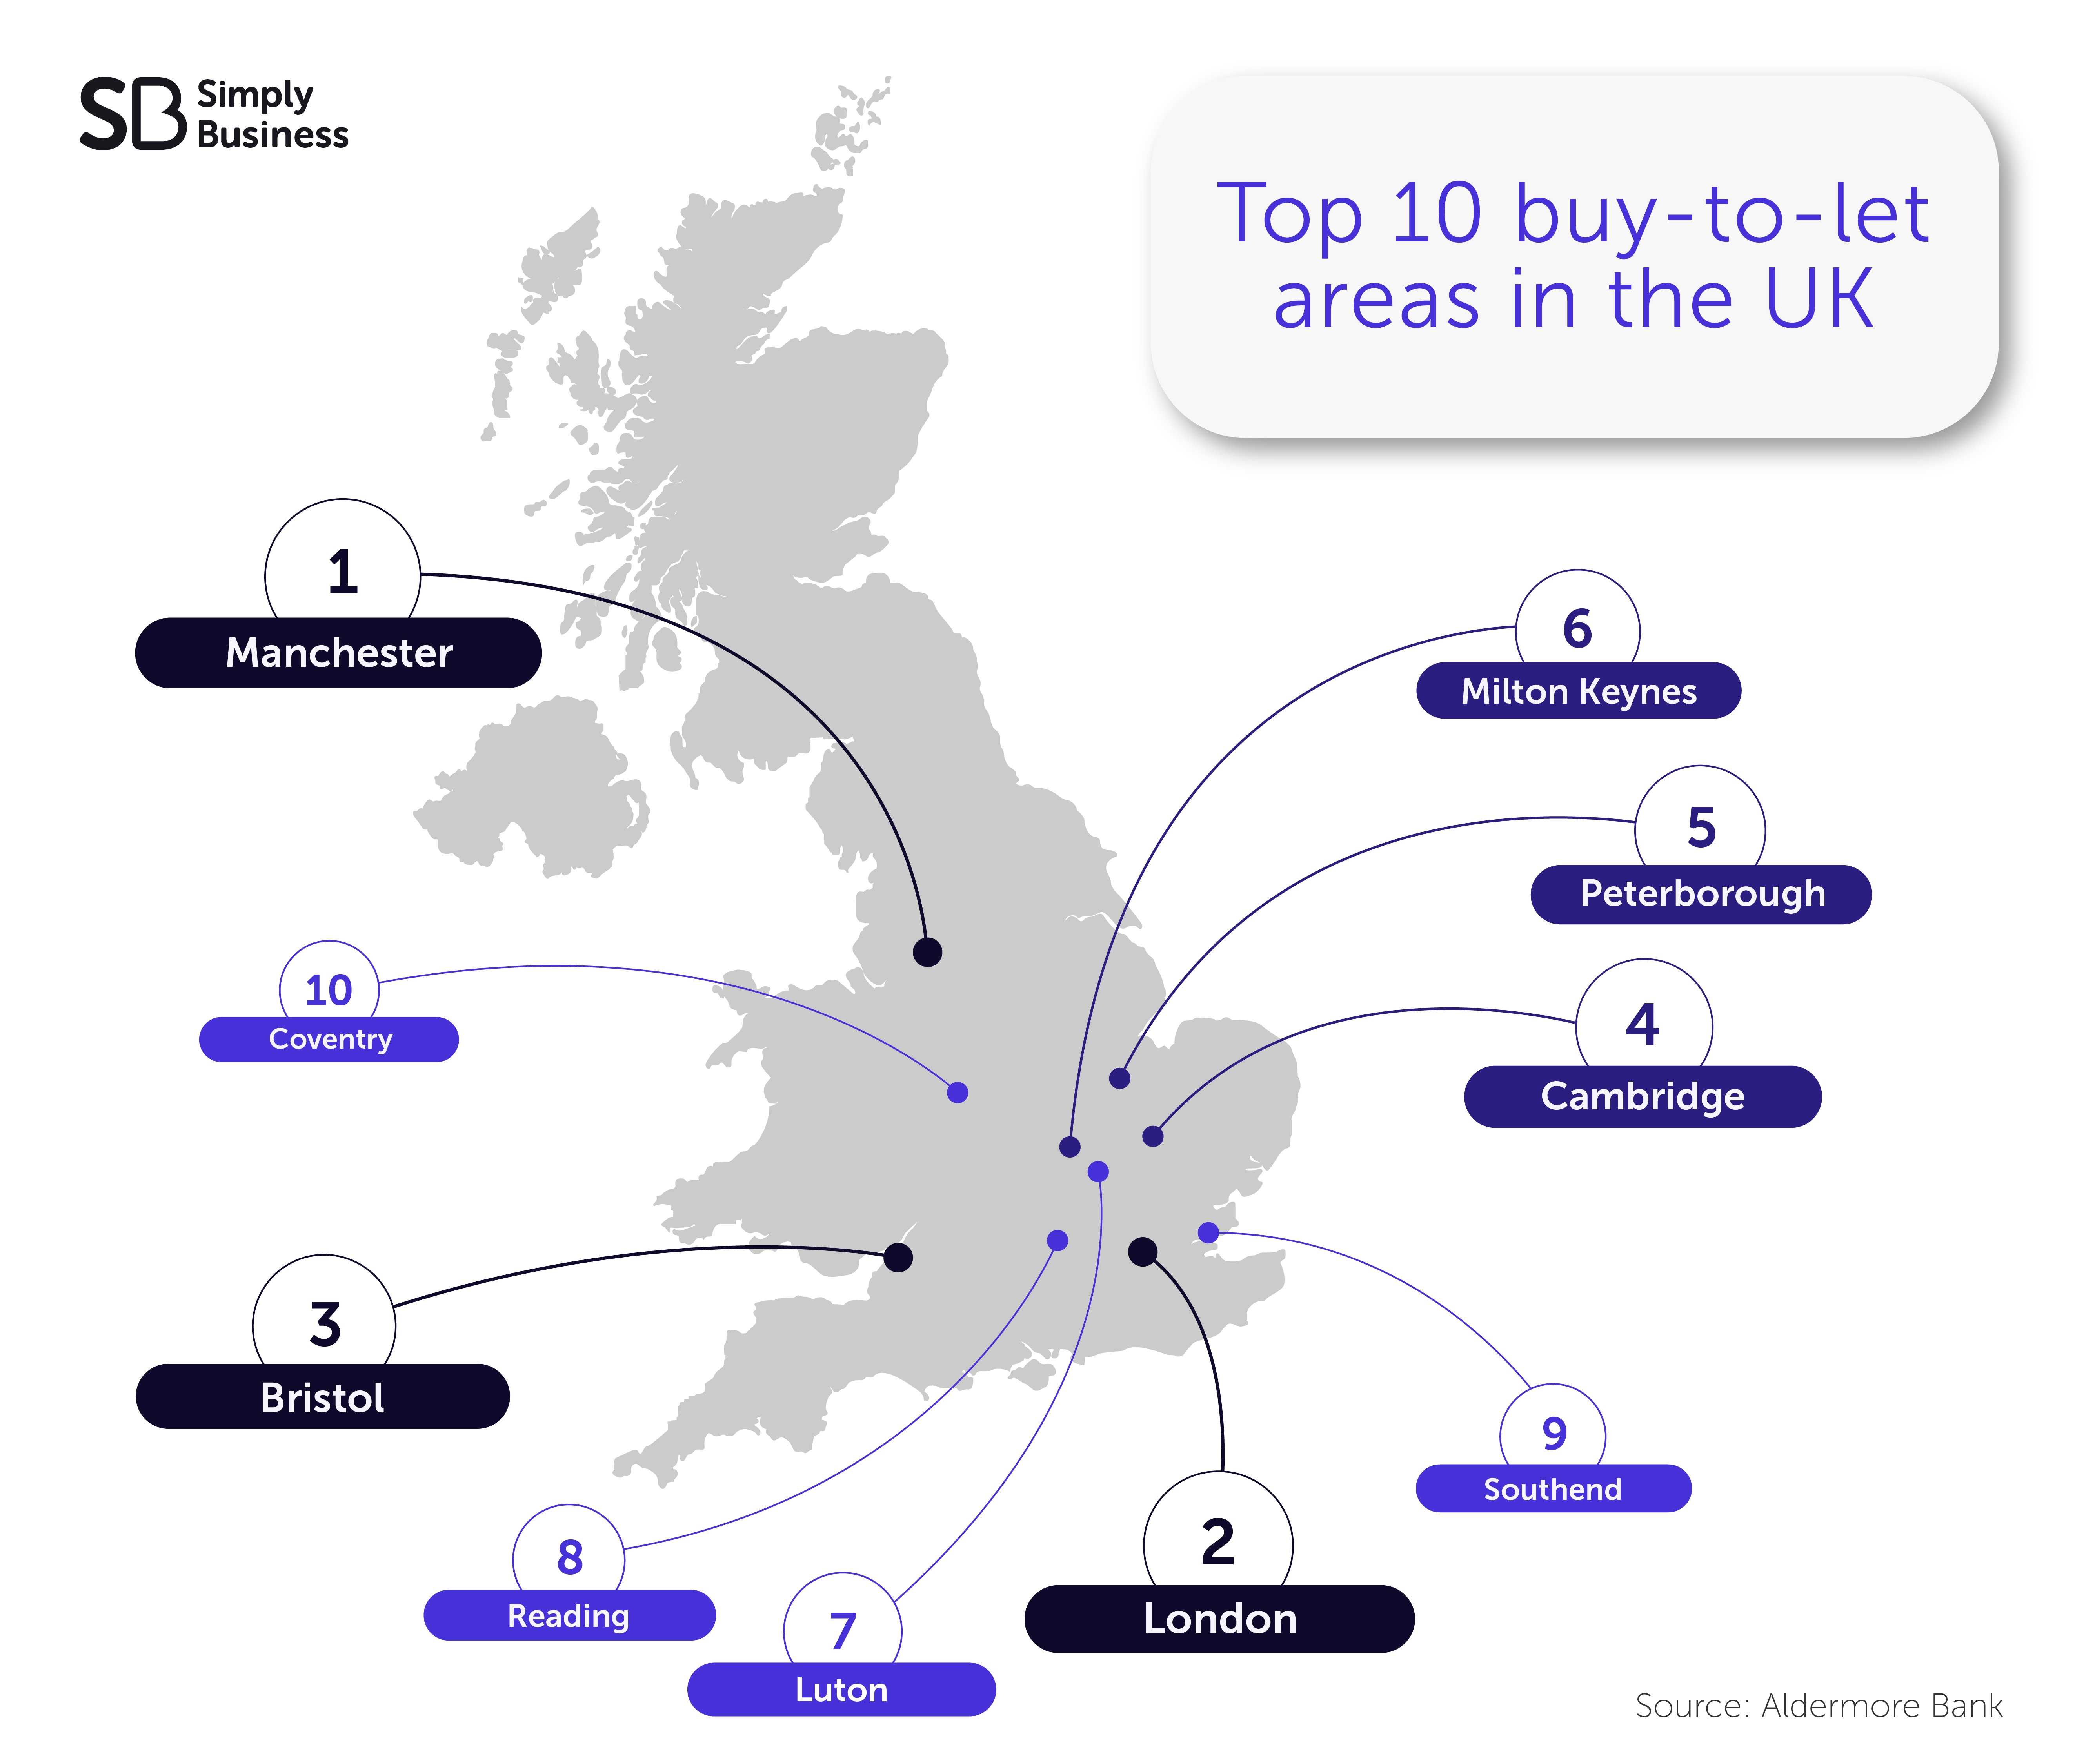 Top 10 buy-to-let areas in the UK